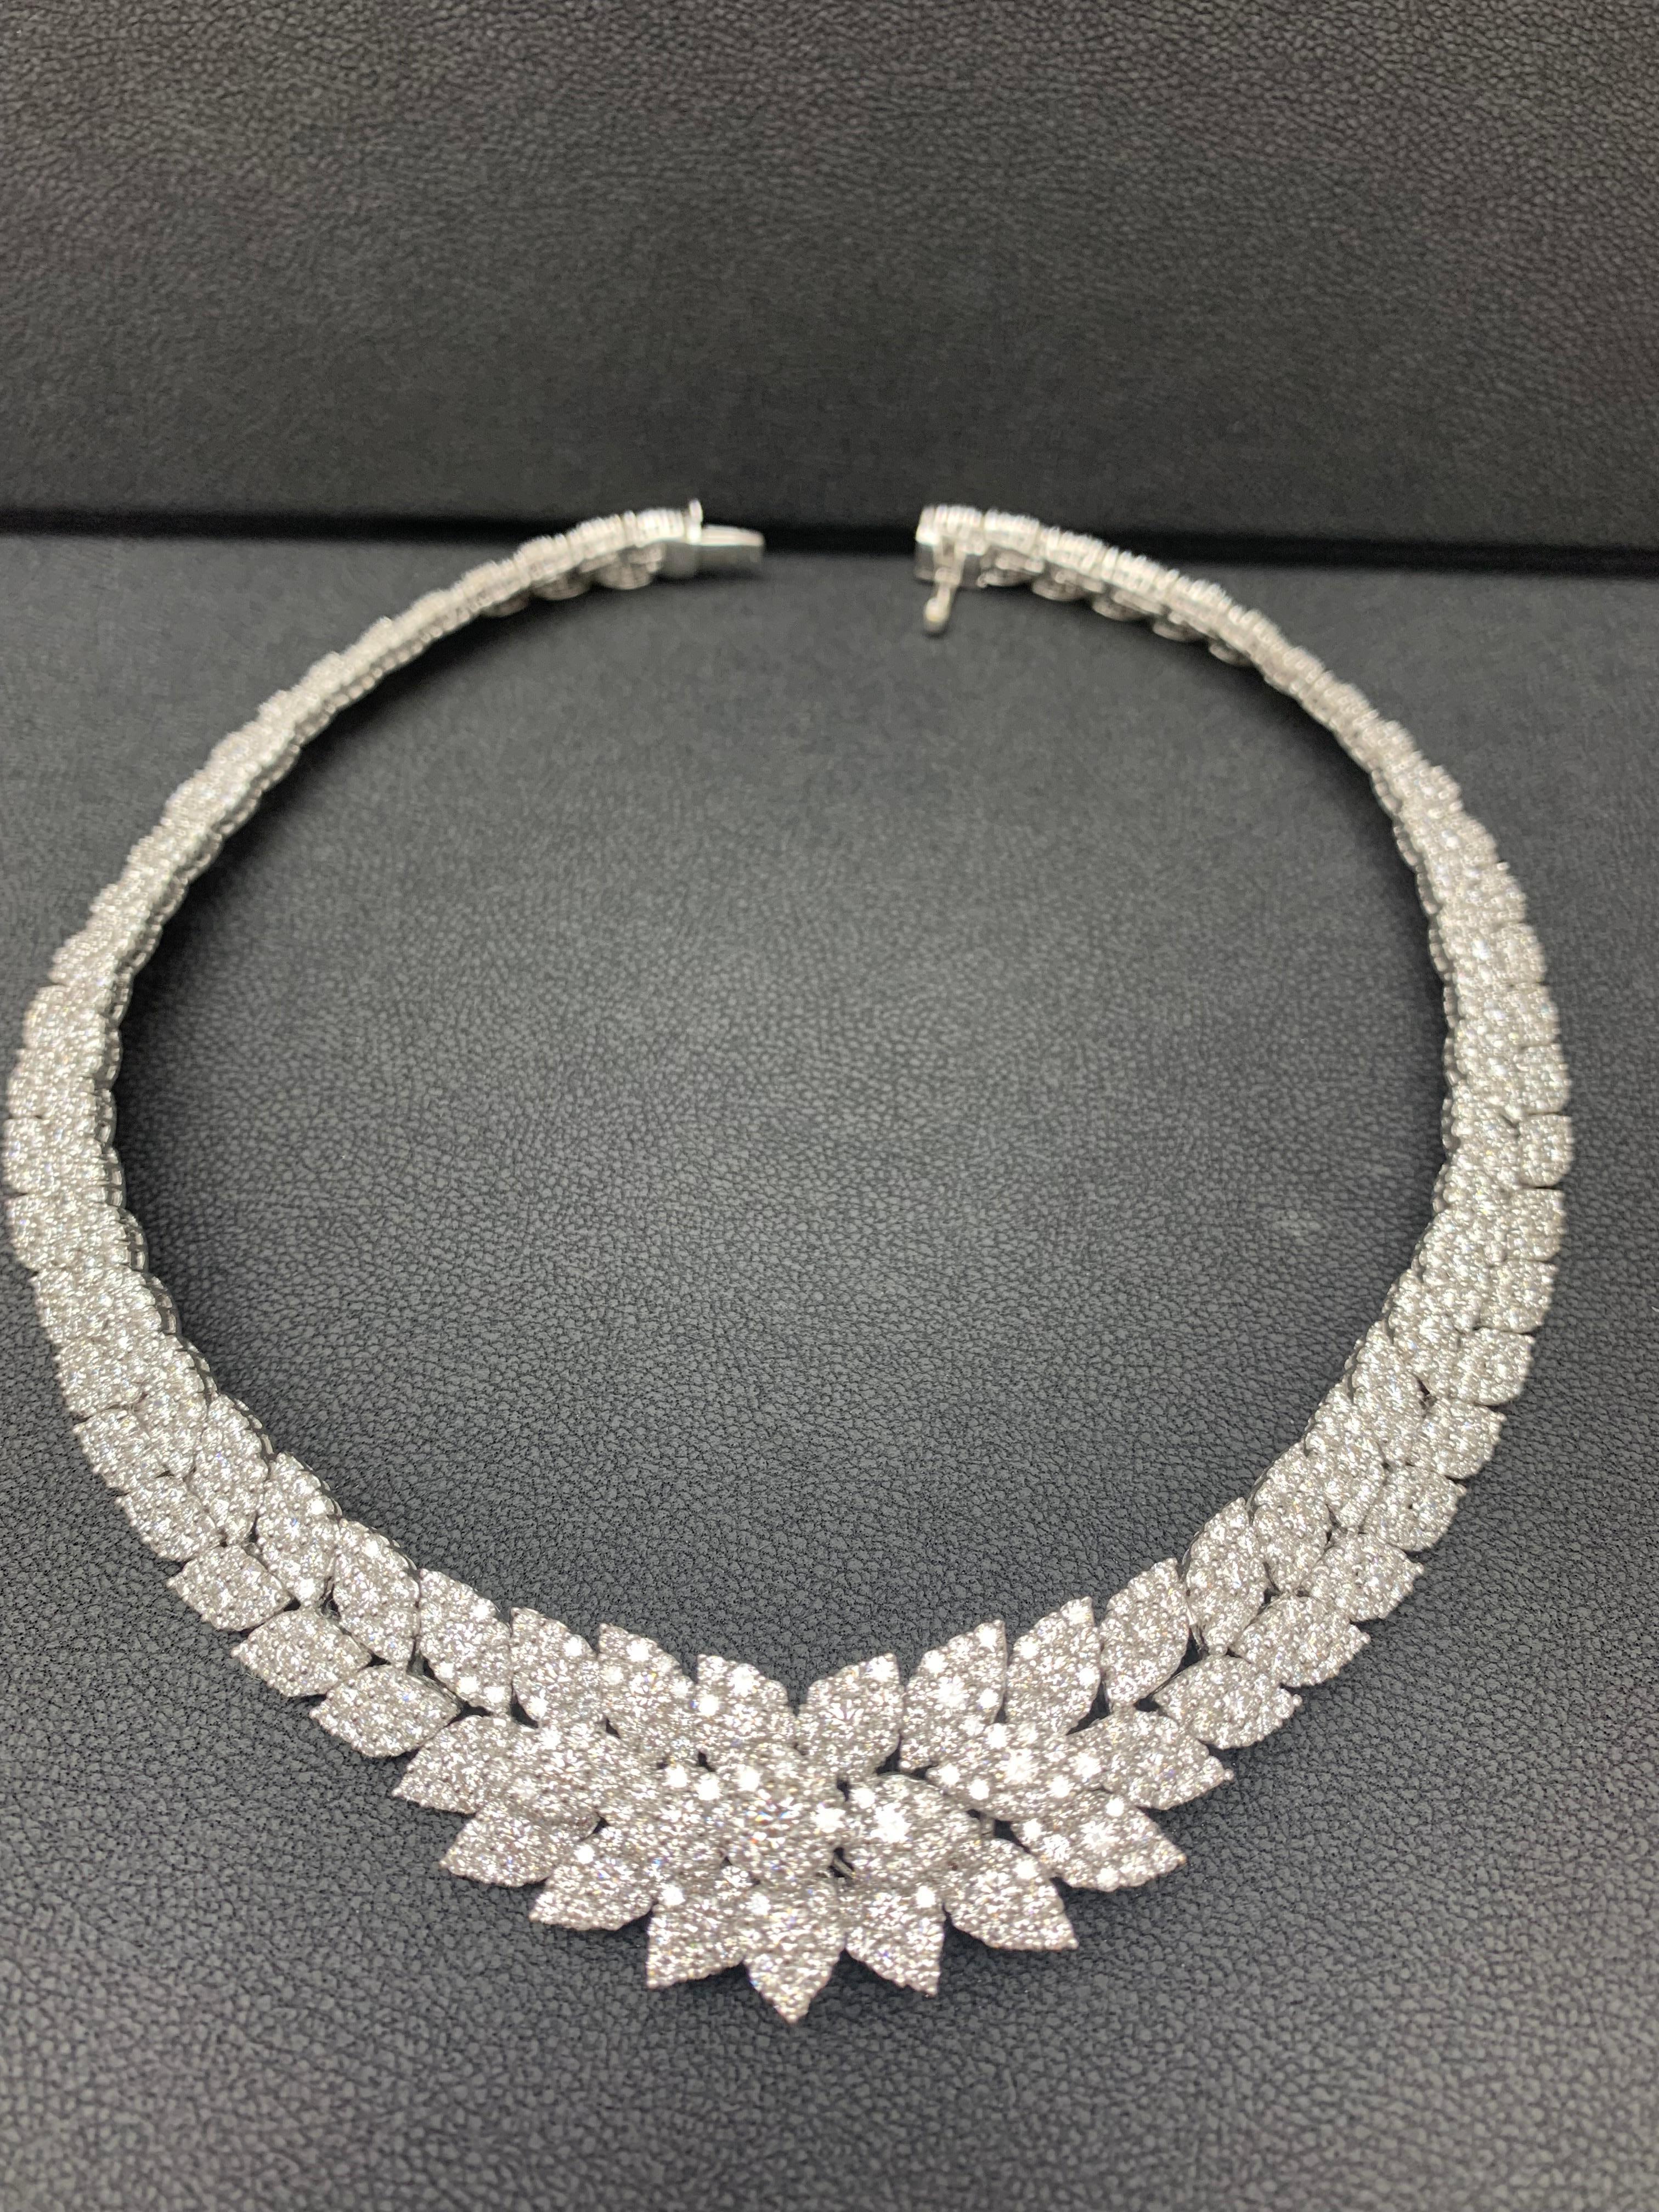 39.58 Carat Cluster Diamond Necklace in 18K White Gold For Sale 5